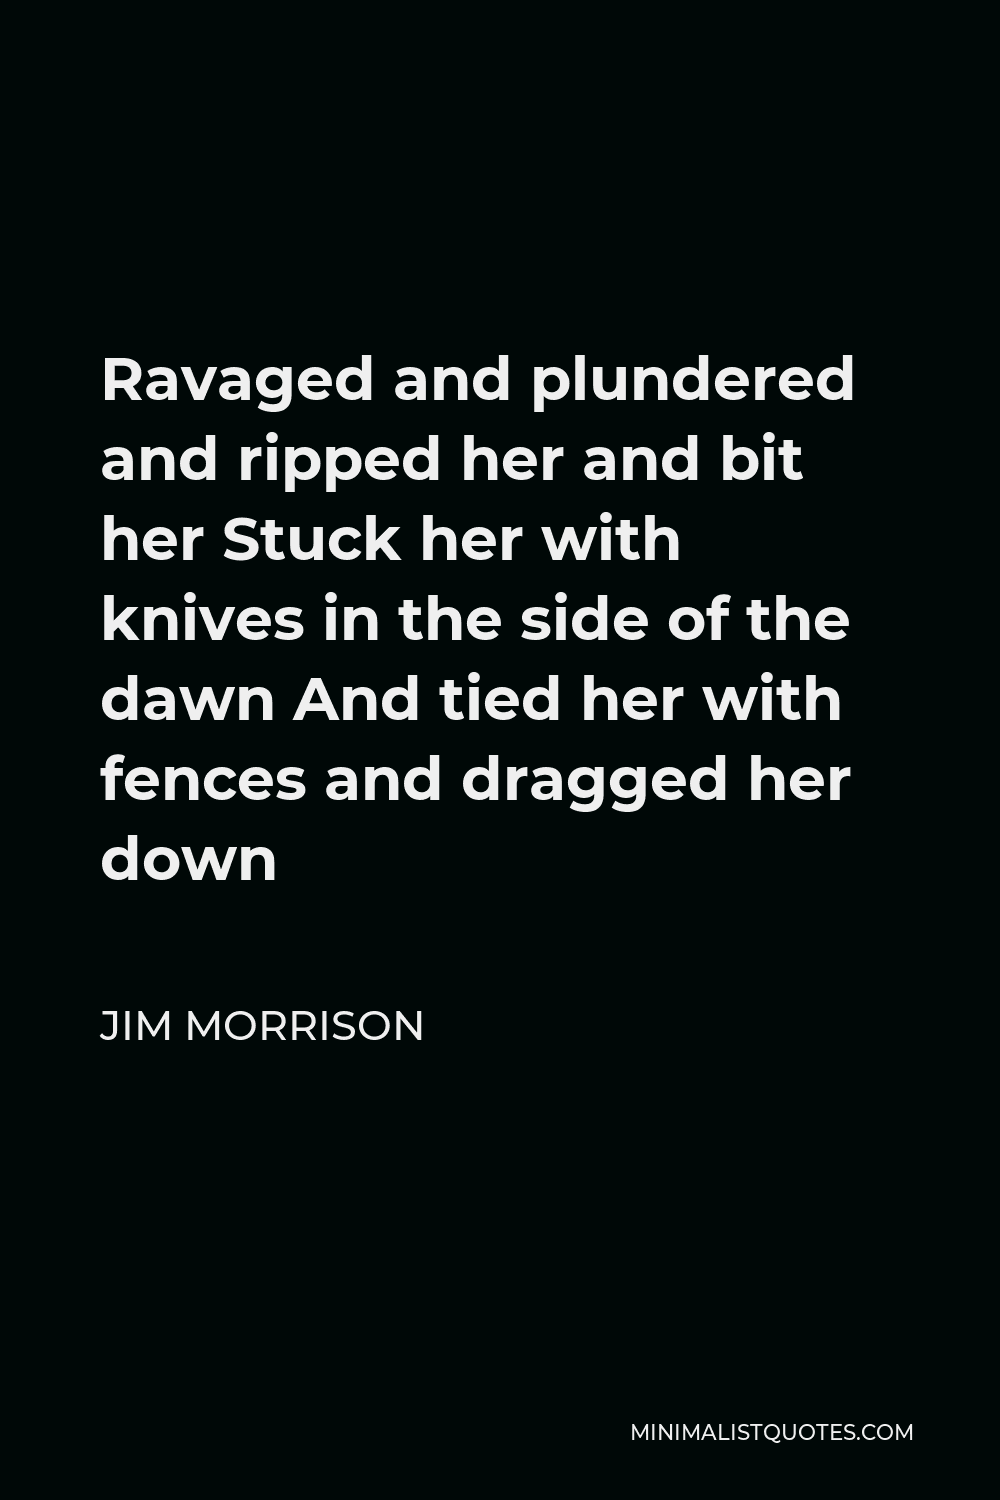 Jim Morrison Quote - Ravaged and plundered and ripped her and bit her Stuck her with knives in the side of the dawn And tied her with fences and dragged her down